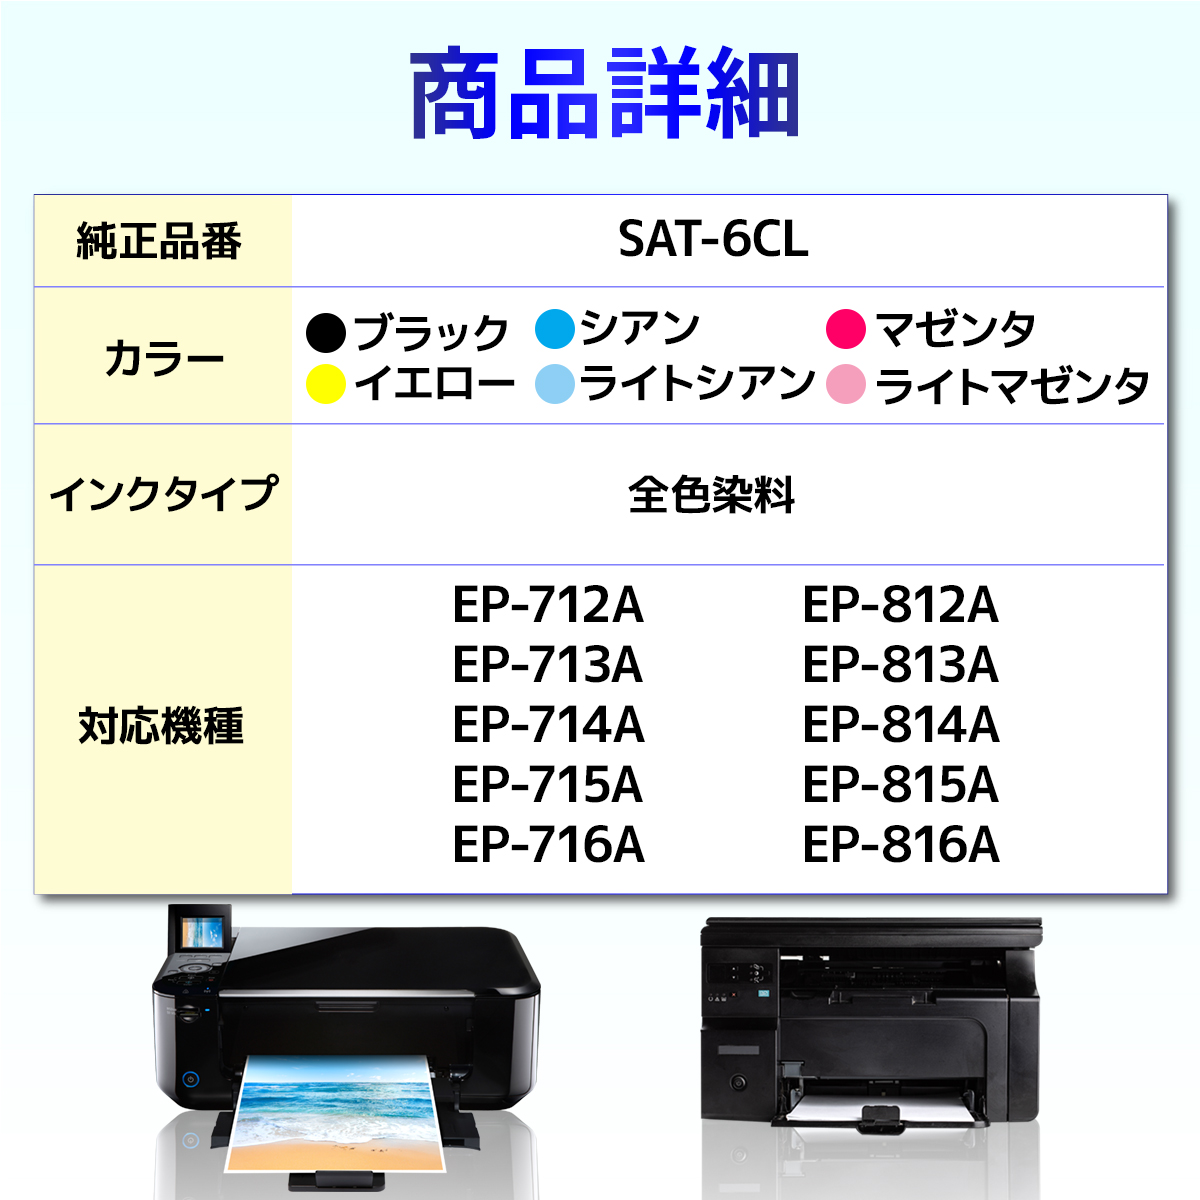 SAT-6CL SAT サツマイモ 互換 インク １４個 EPSON エプソン EP-712A